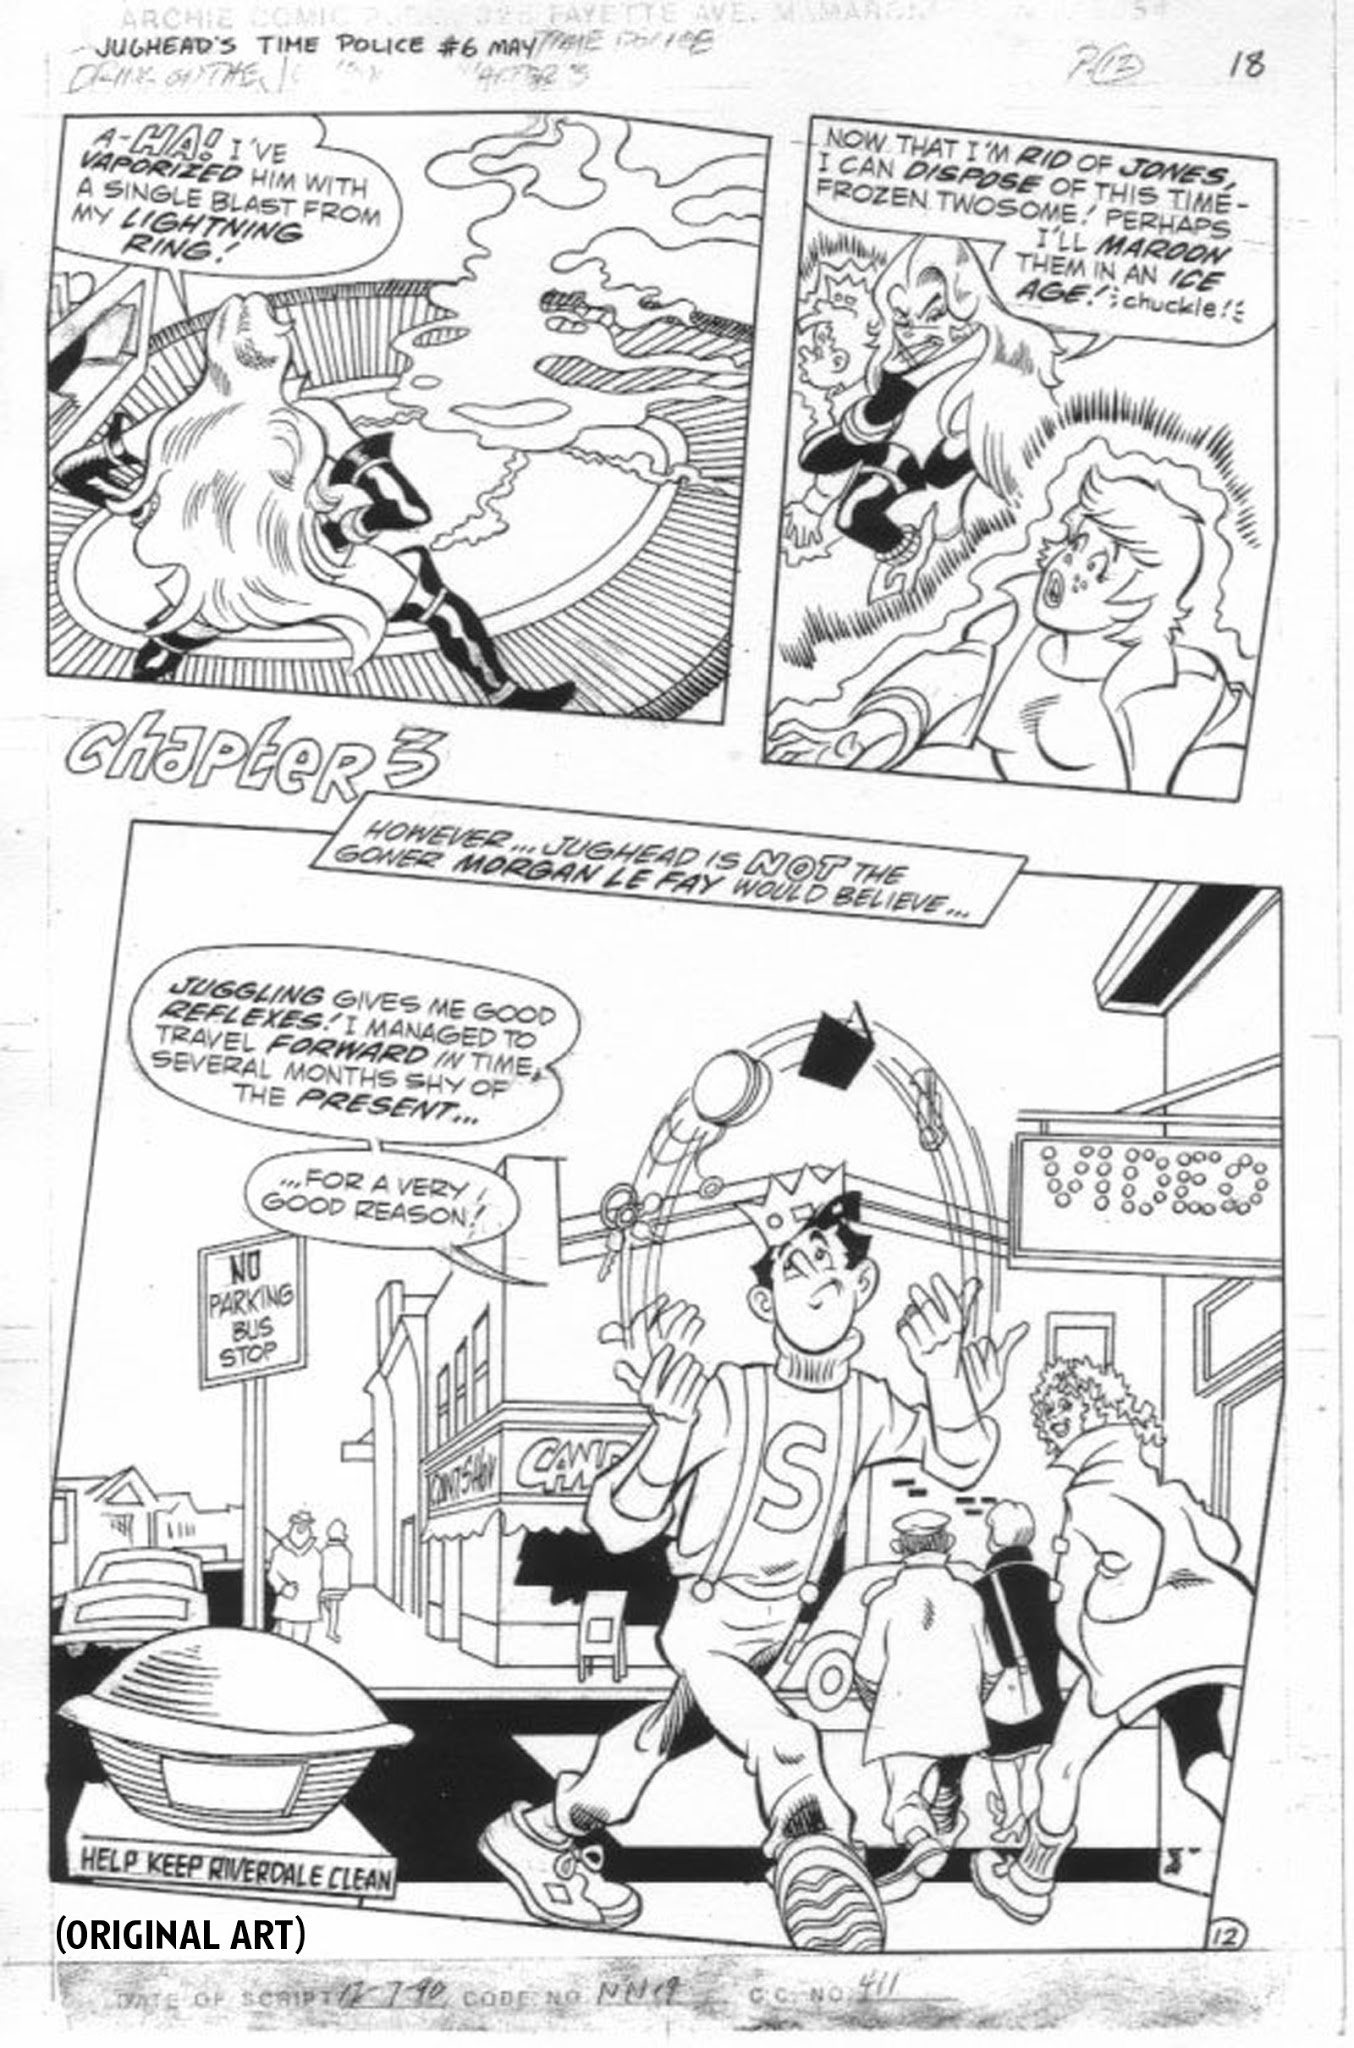 Read online Jughead's Time Police comic -  Issue #6 - 37